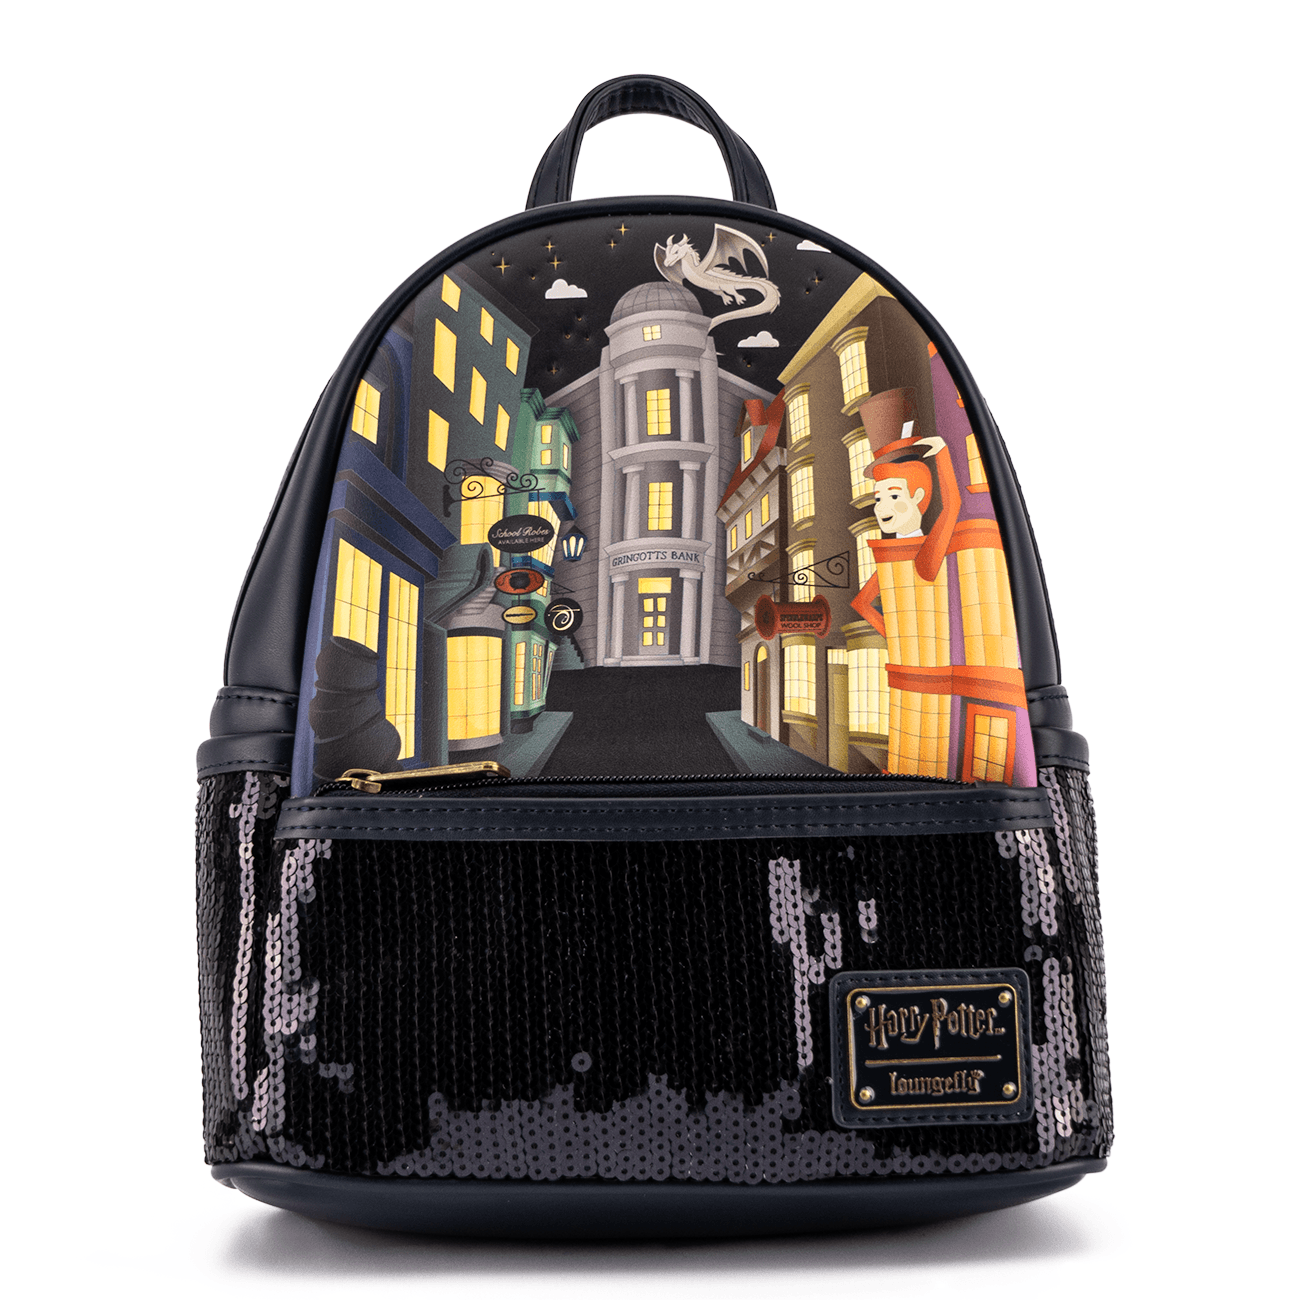 Harry Potter Diagon Alley Mini Backpack